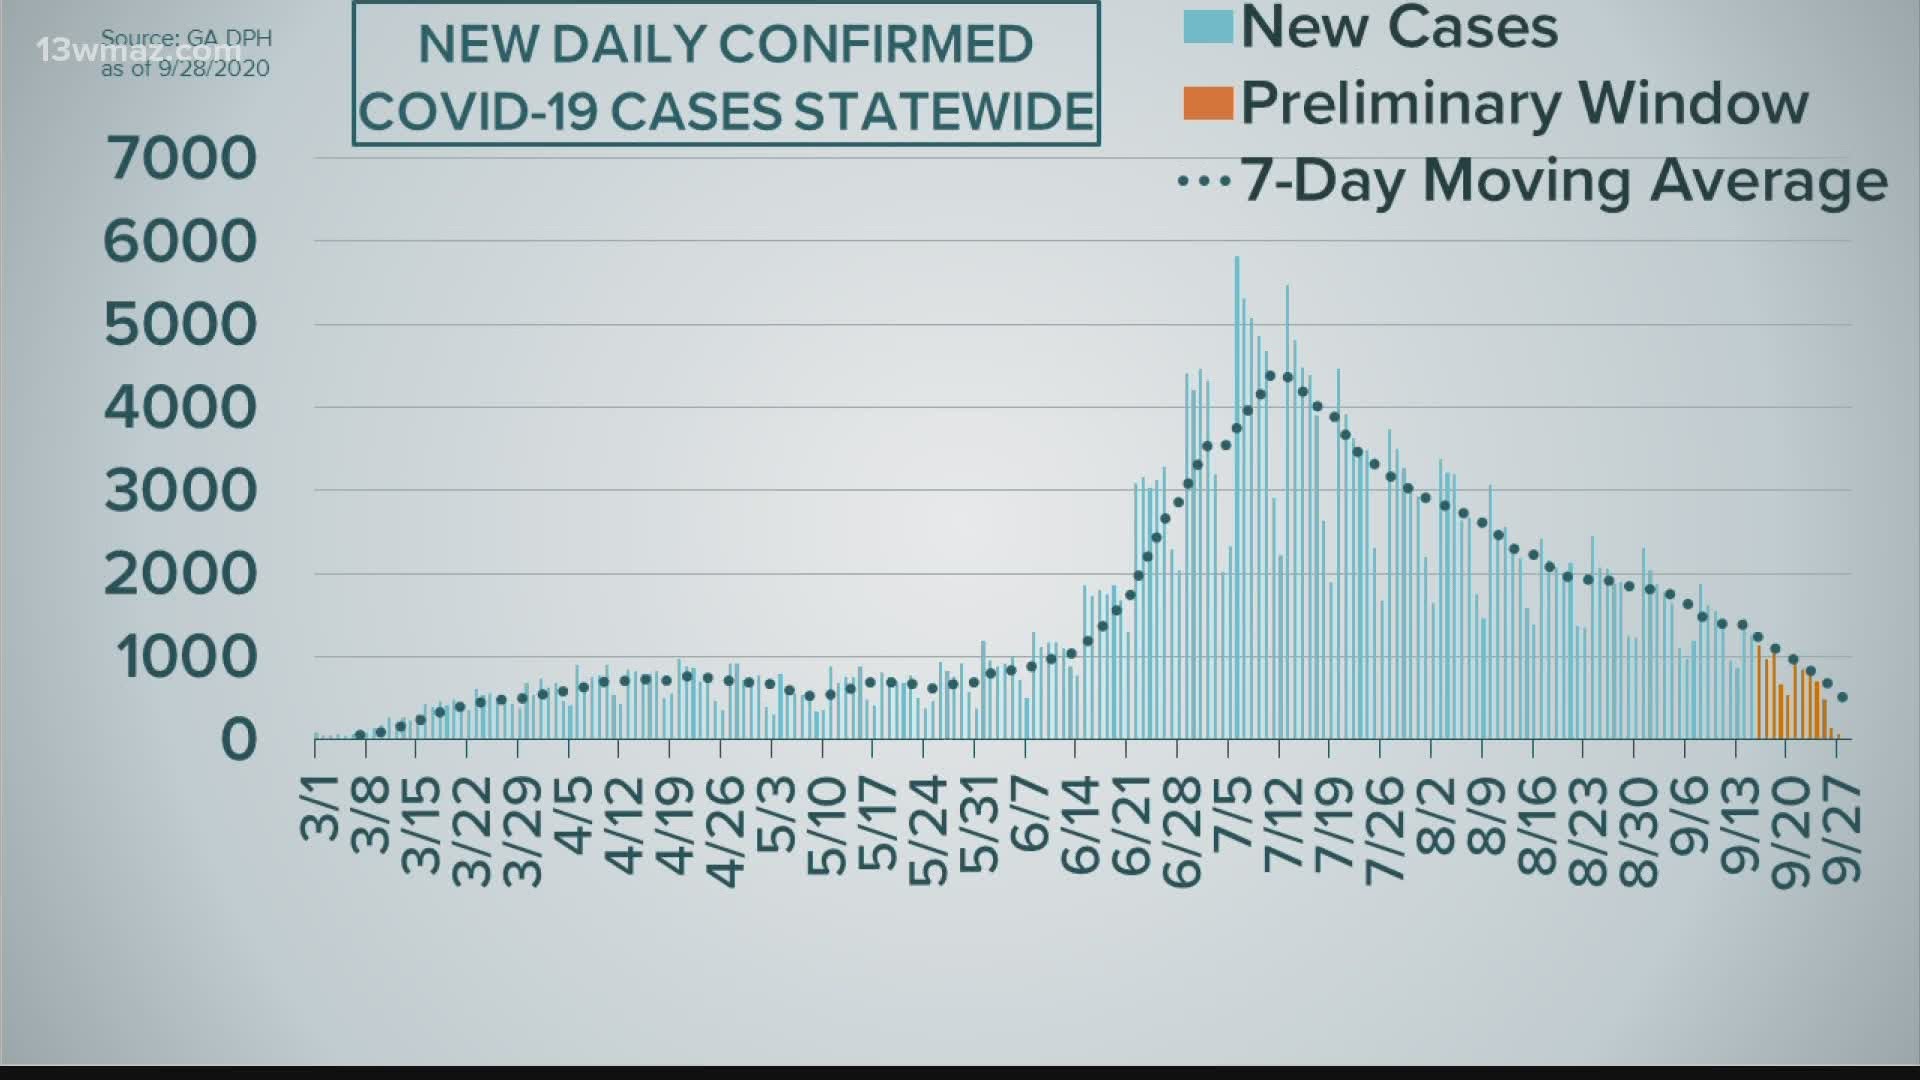 Georgia saw a slight uptick in cases before the start of the preliminary data window, but overall, the state continues to see fewer new cases each day.